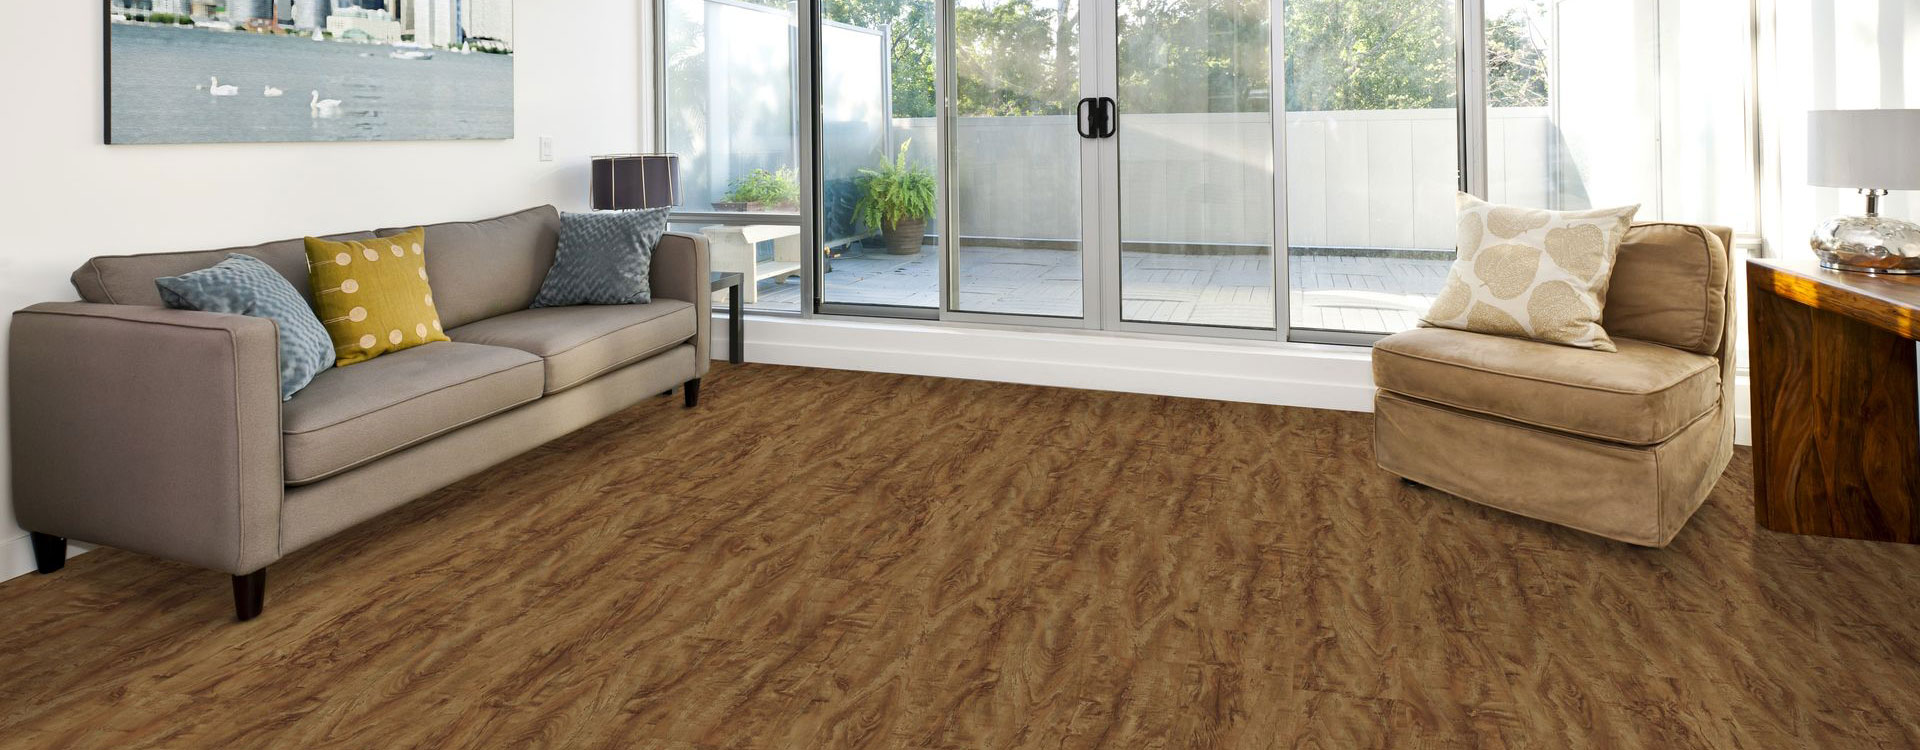 Horizen Flooring presents to you a picture of a quality wide plank Hickory luxury vinyl plank. NovoCore Premium EIR collection features a wide range of colors & designs that will compliment any interior. Natural wood grain synchronized surface allow for an authentic hardwood look & feel. This collection features a 0.25″ / 6.5 mm overall thickness and a durable 22 mil / 0.55 mm wear layer for residential and commercial applications.